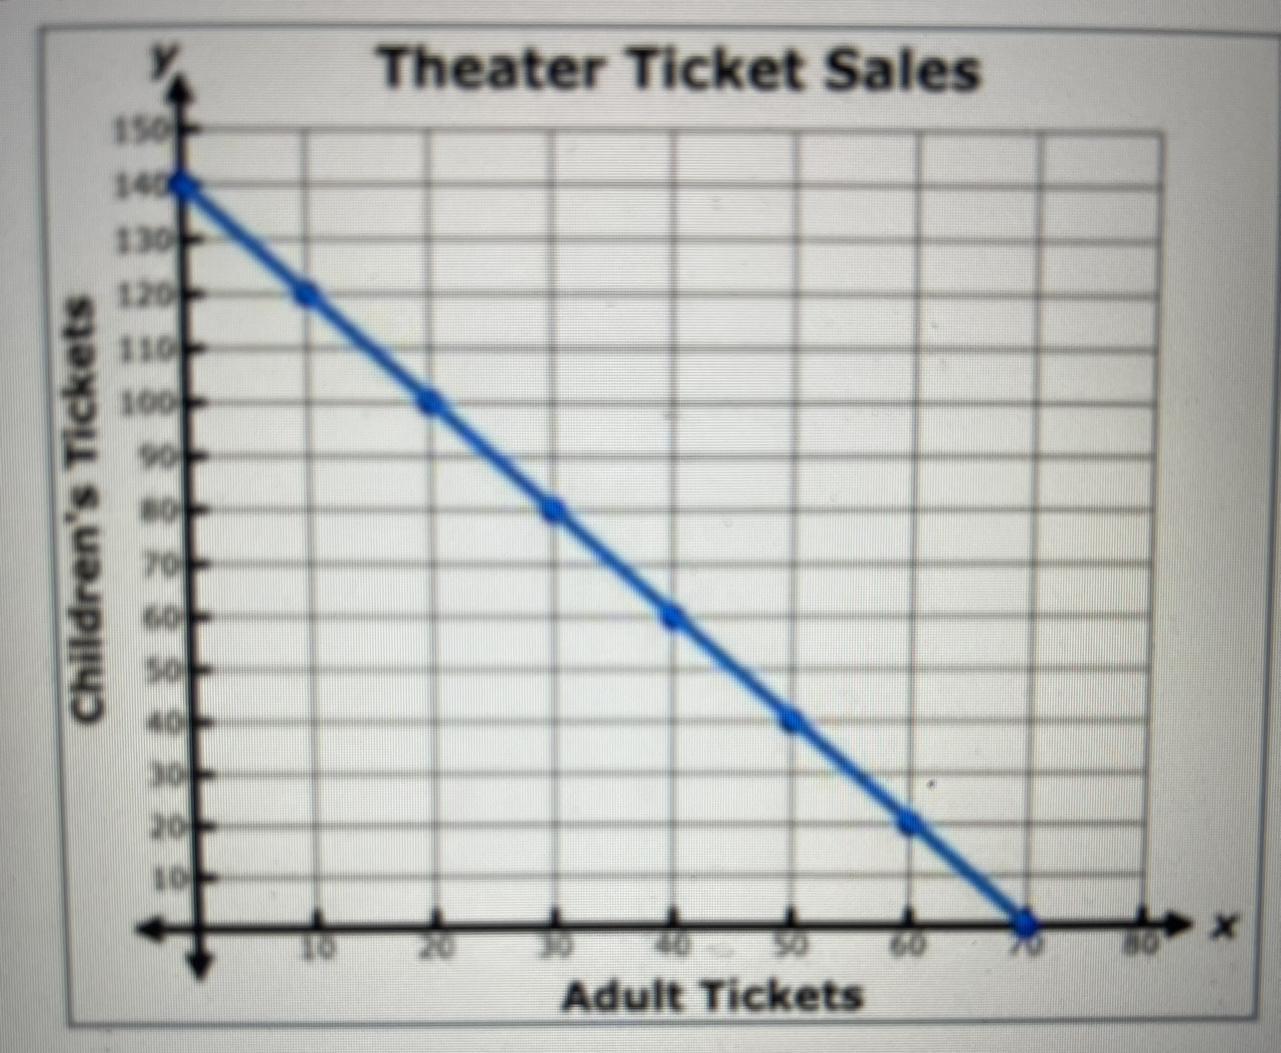 1. The Graph Below Shows The Number Of Children's And Adult Tickets Sold Each Day Of A Performance. (a)